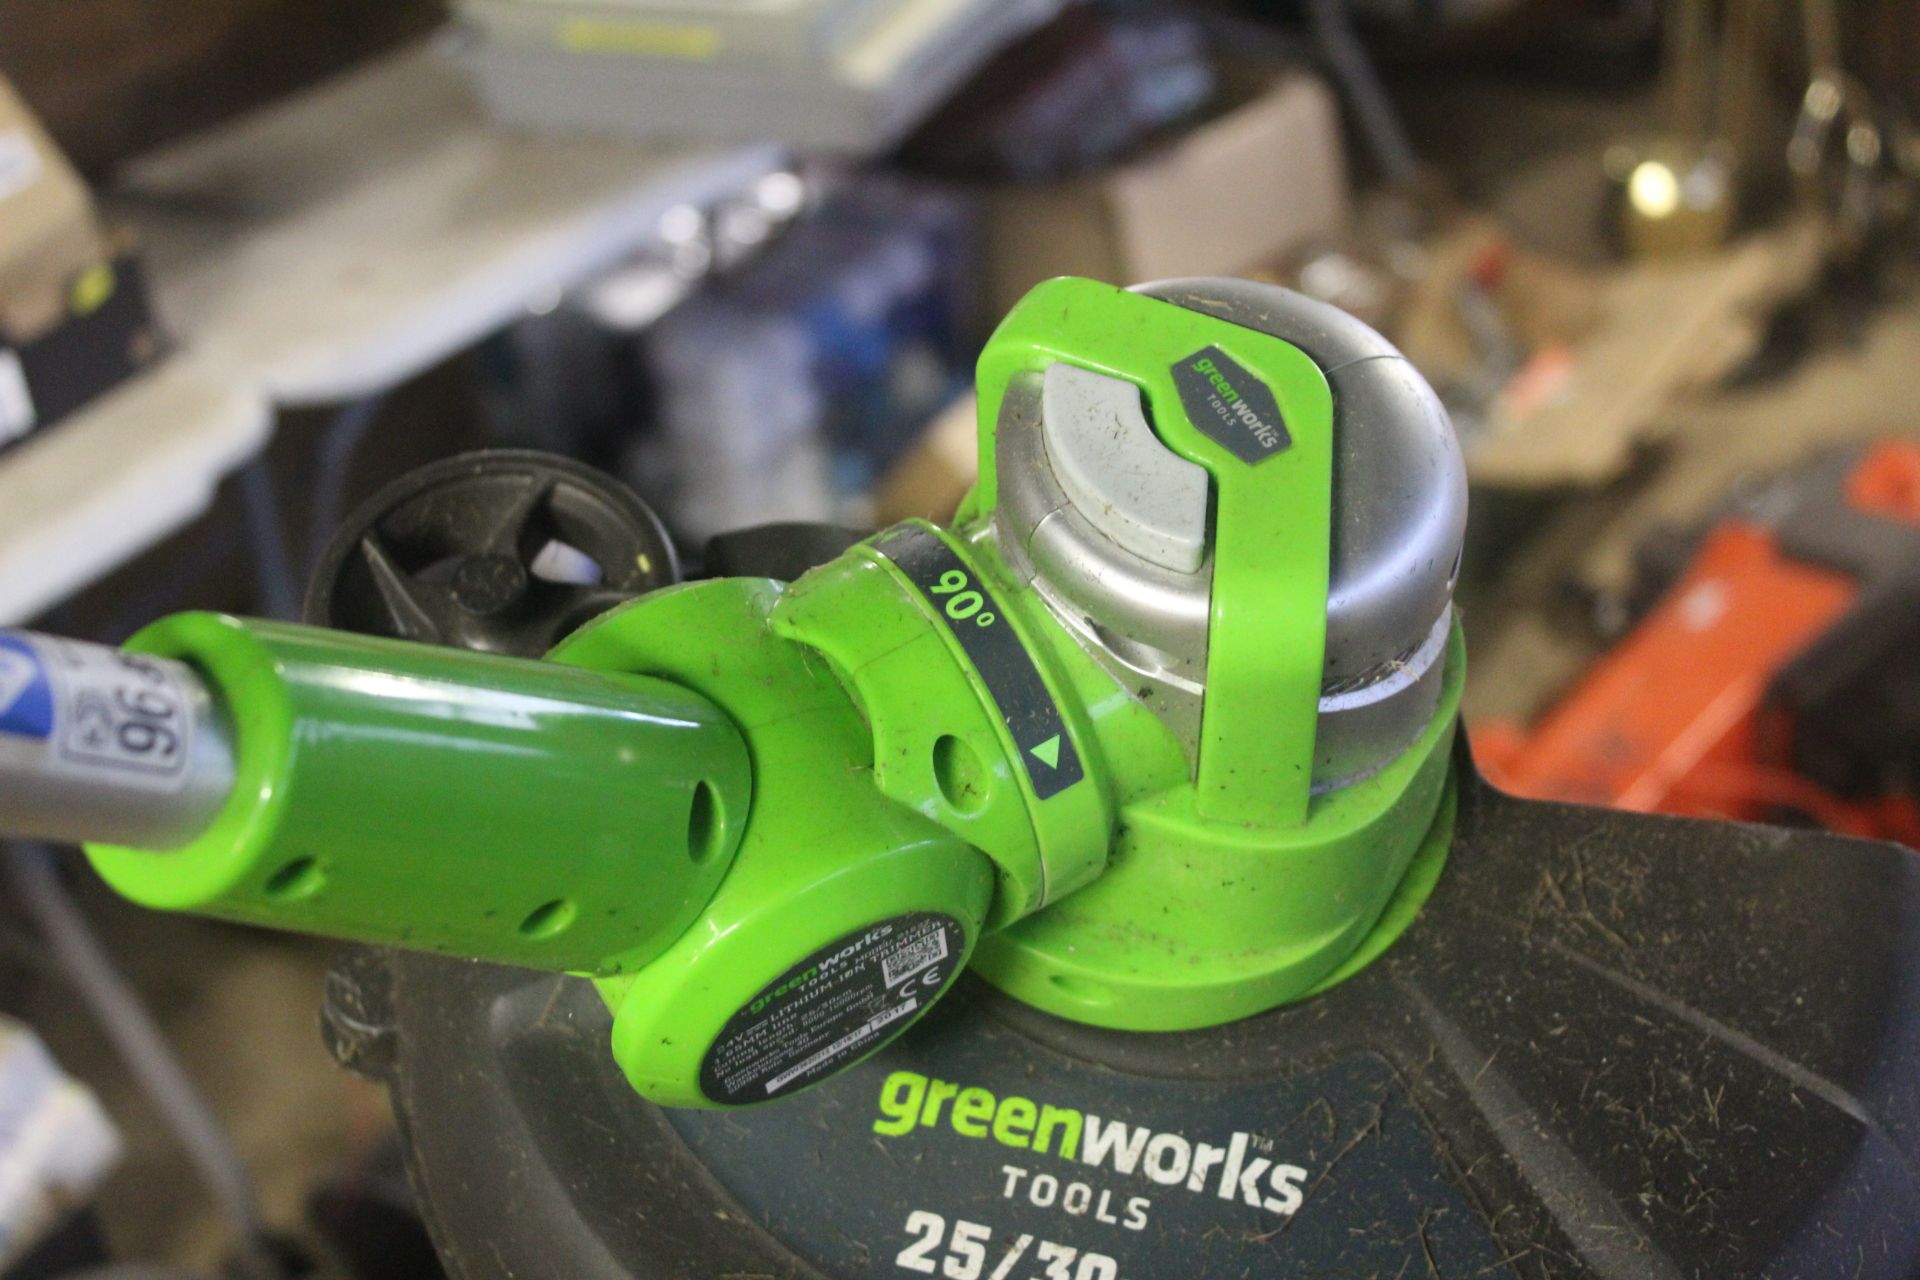 A Greenworks 21227 cordless electric strimmer lack - Image 5 of 5